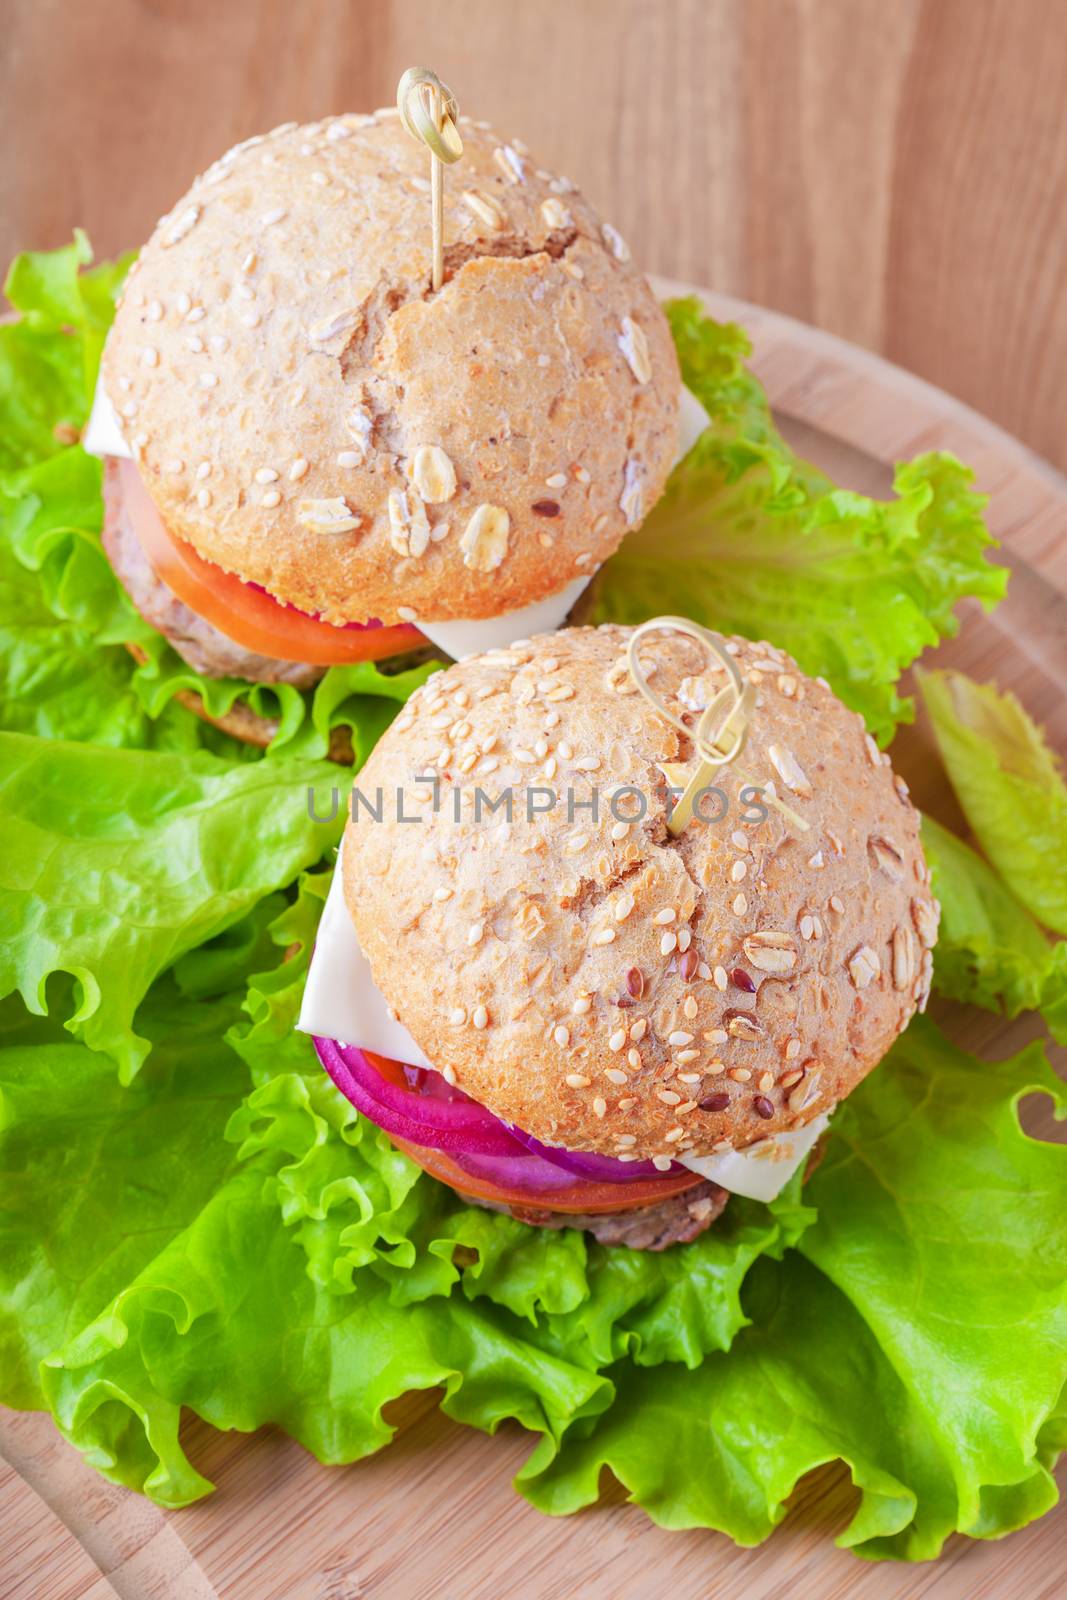 Cheeseburger with tomato, onion and green salad.